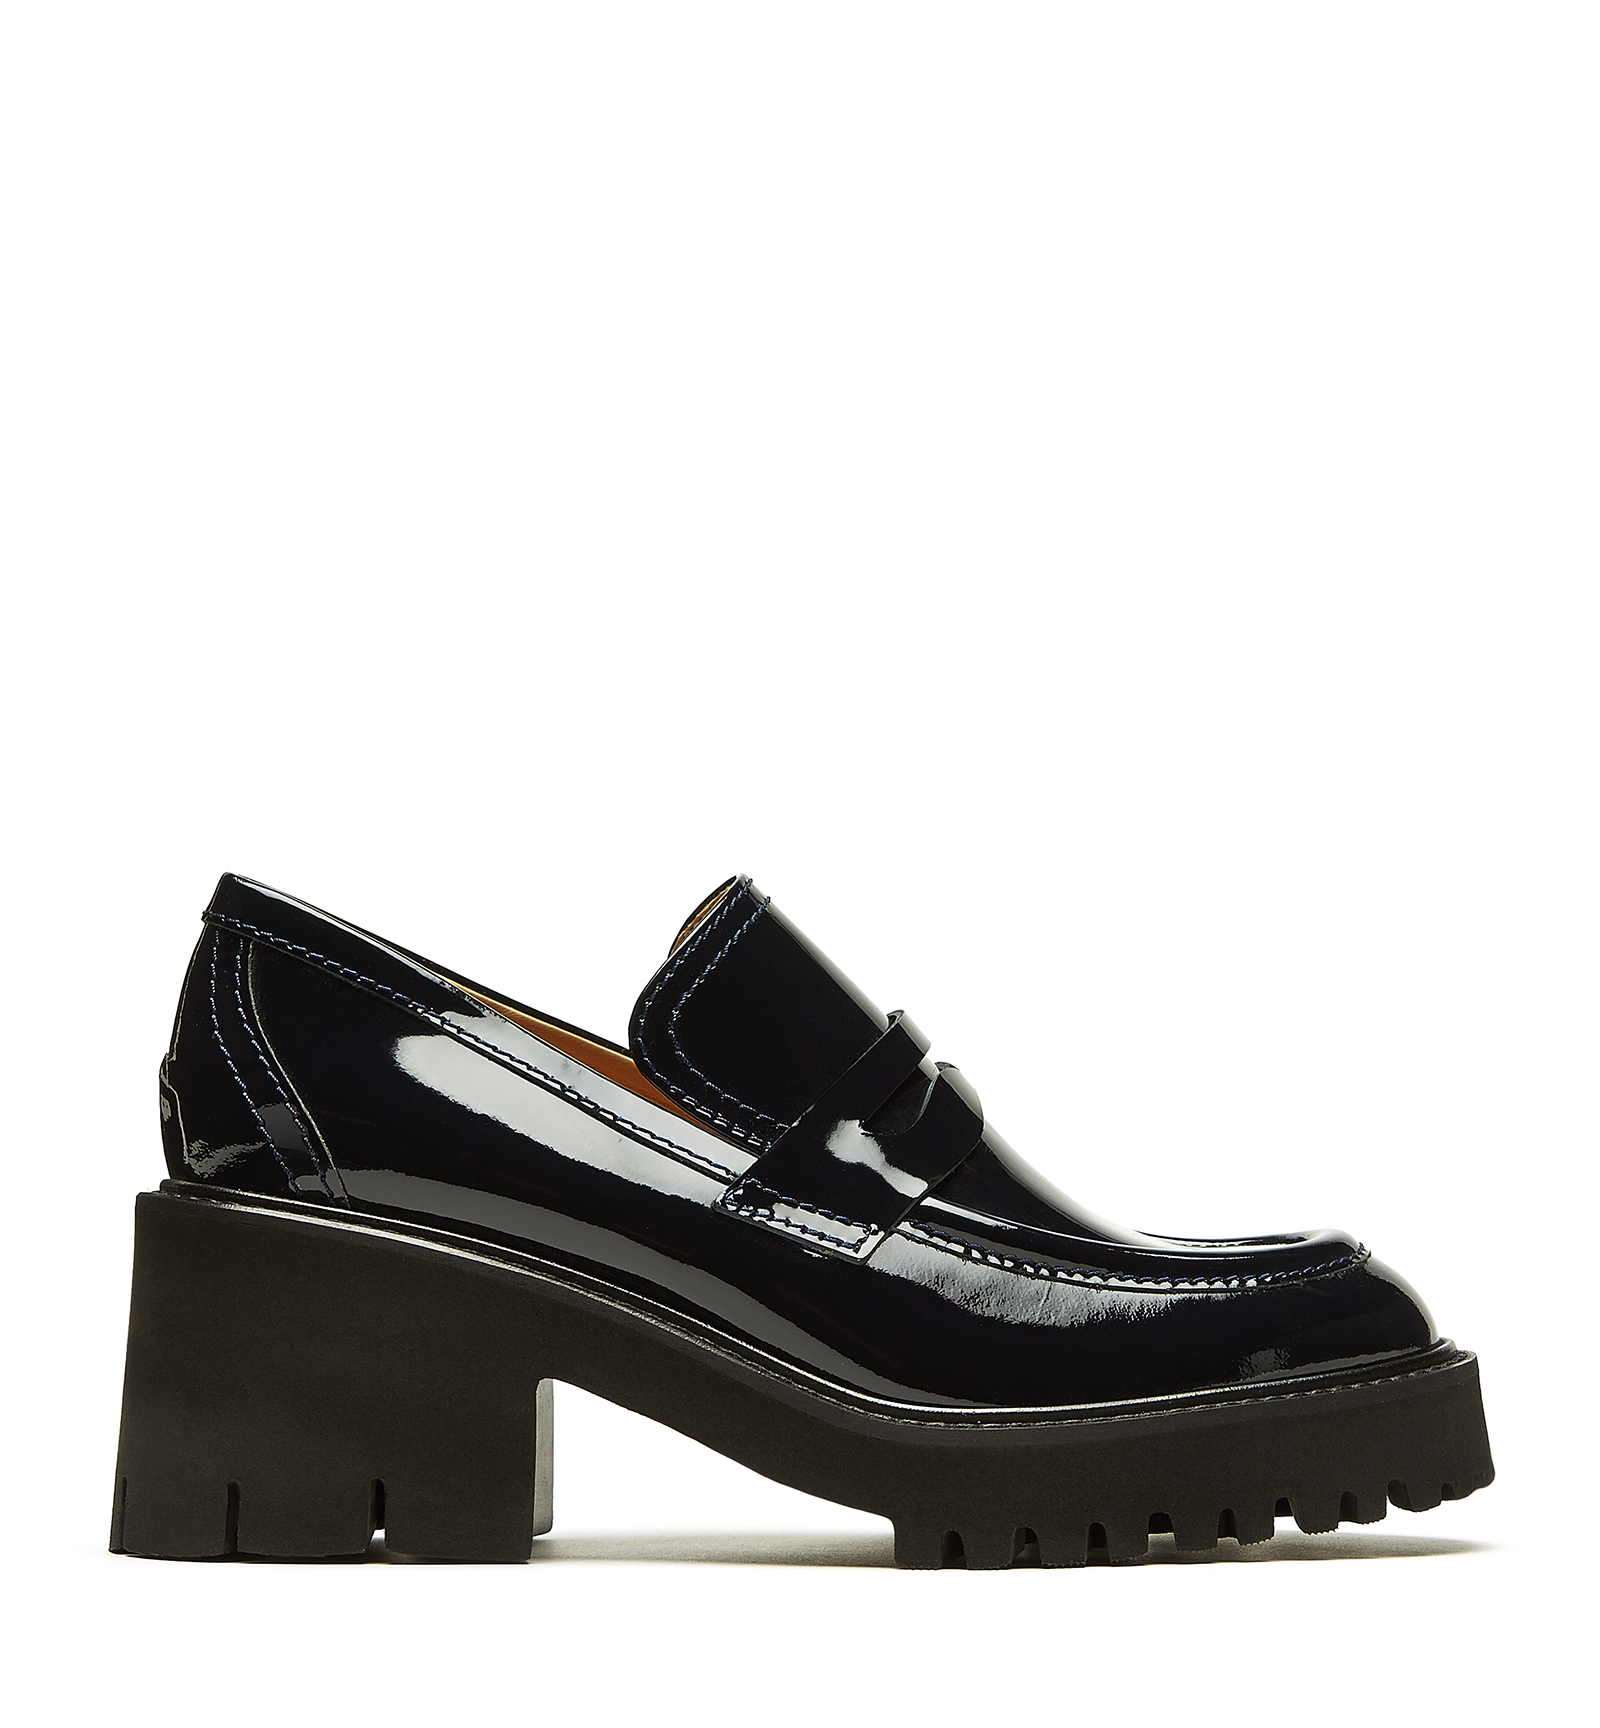 La Canadienne Readmid Leather Loafer In Navy